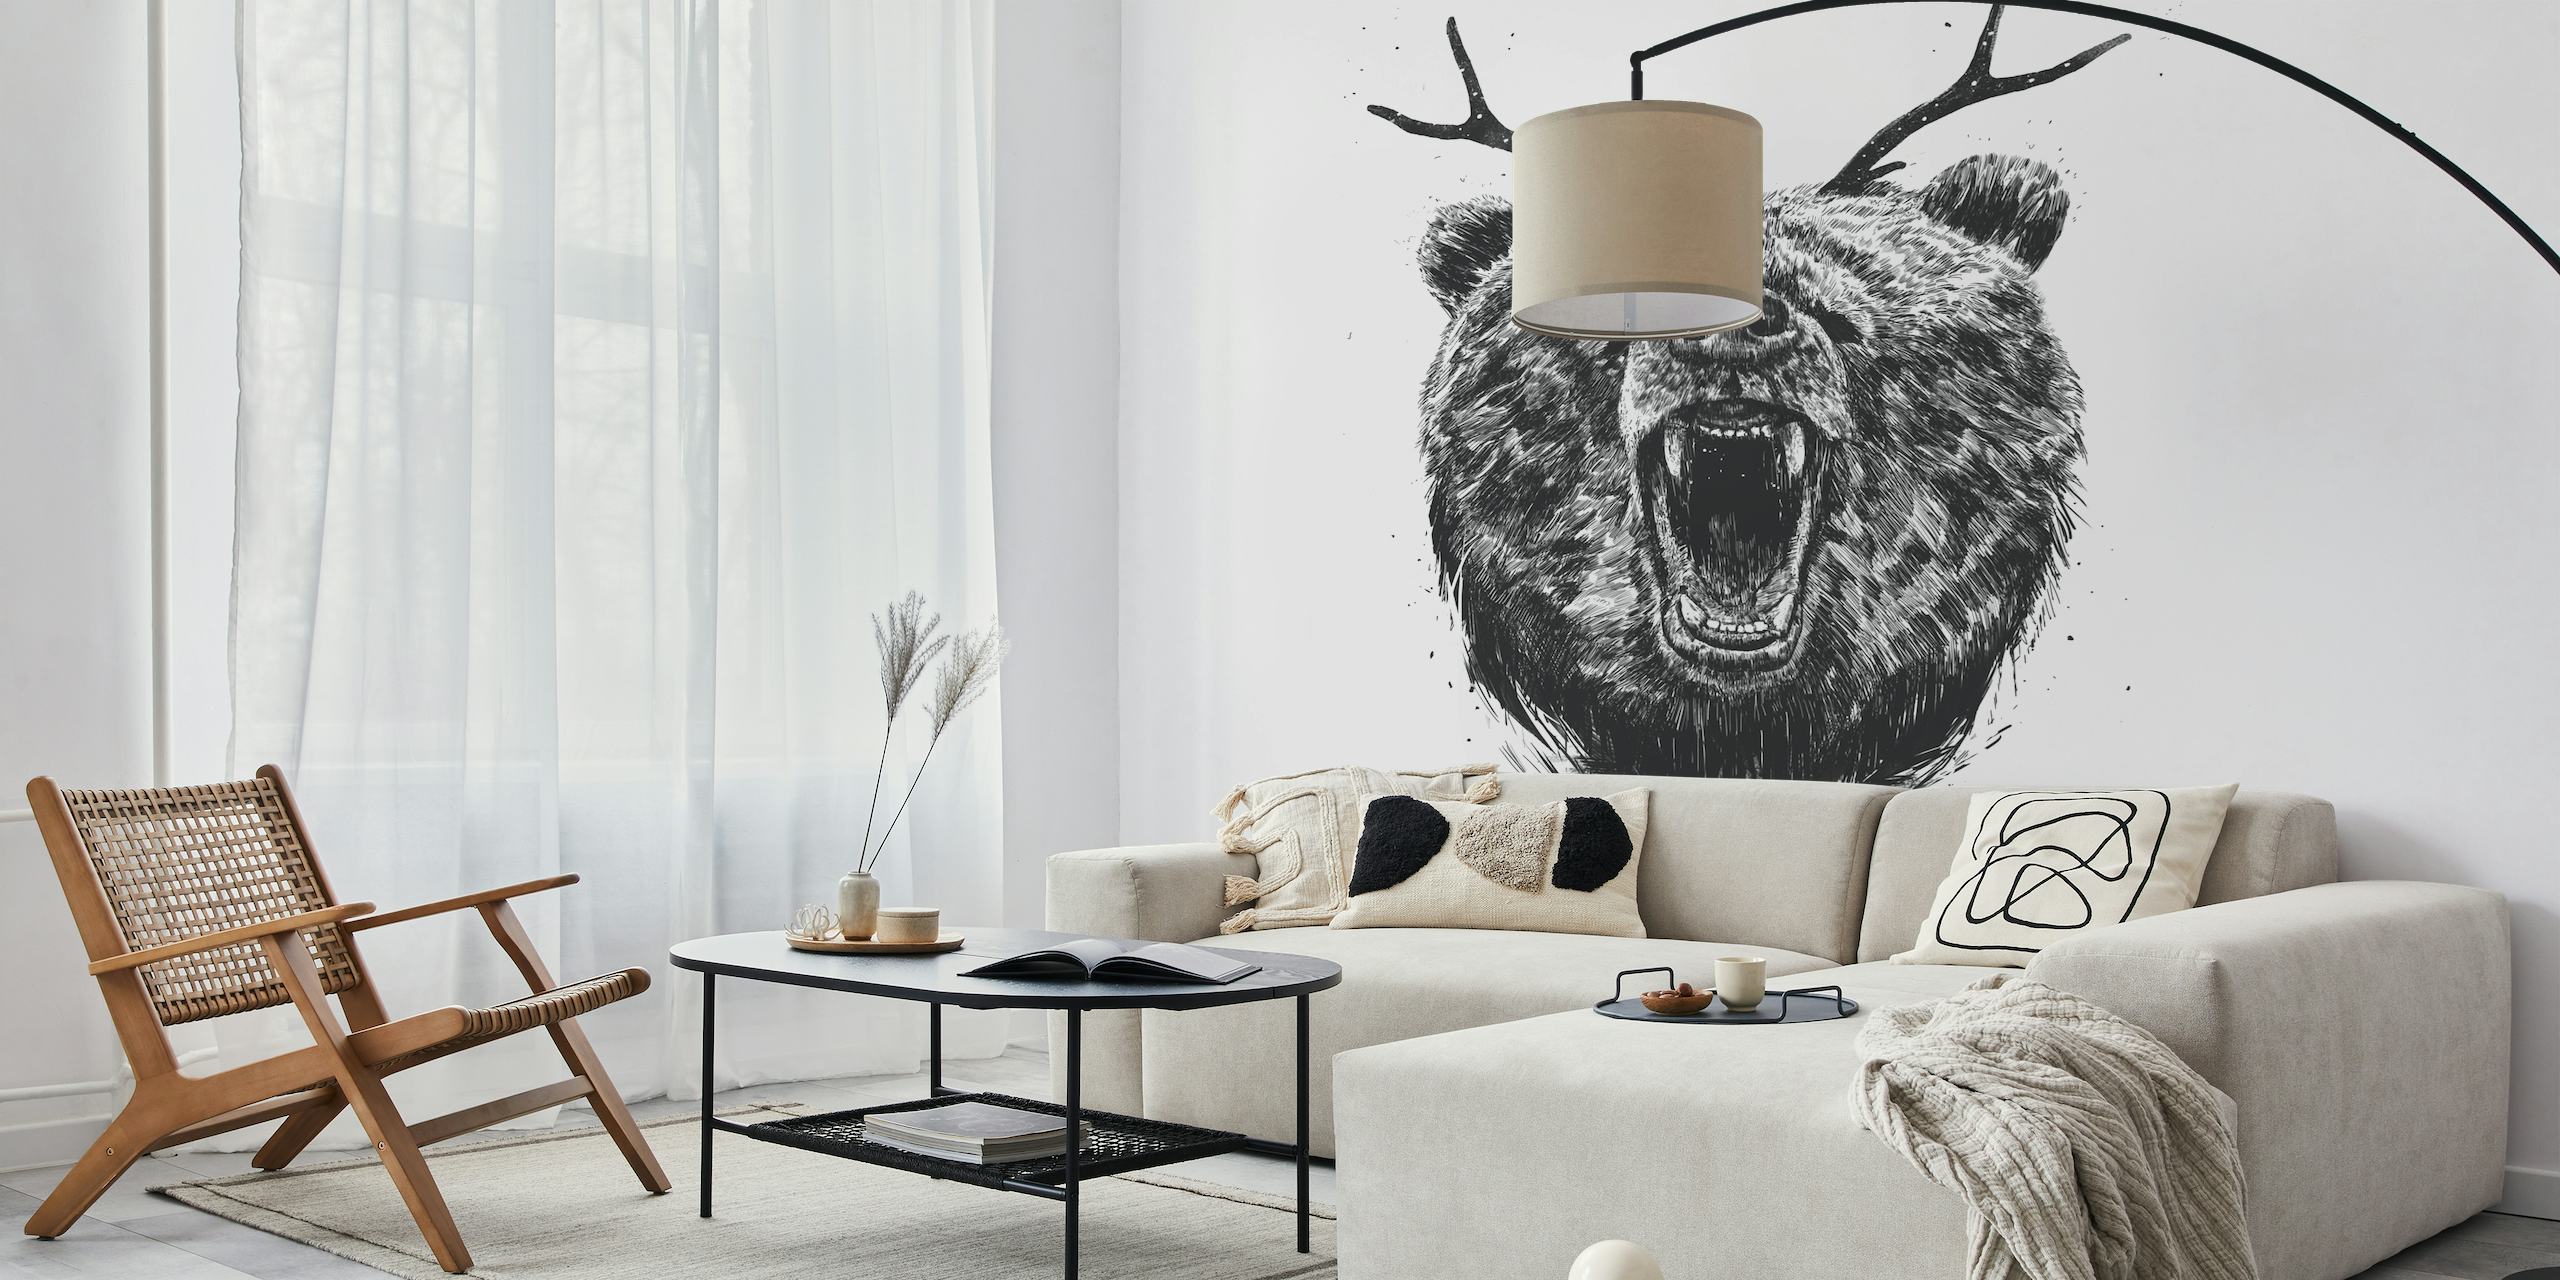 Black and white wall mural of an angry bear with antlers